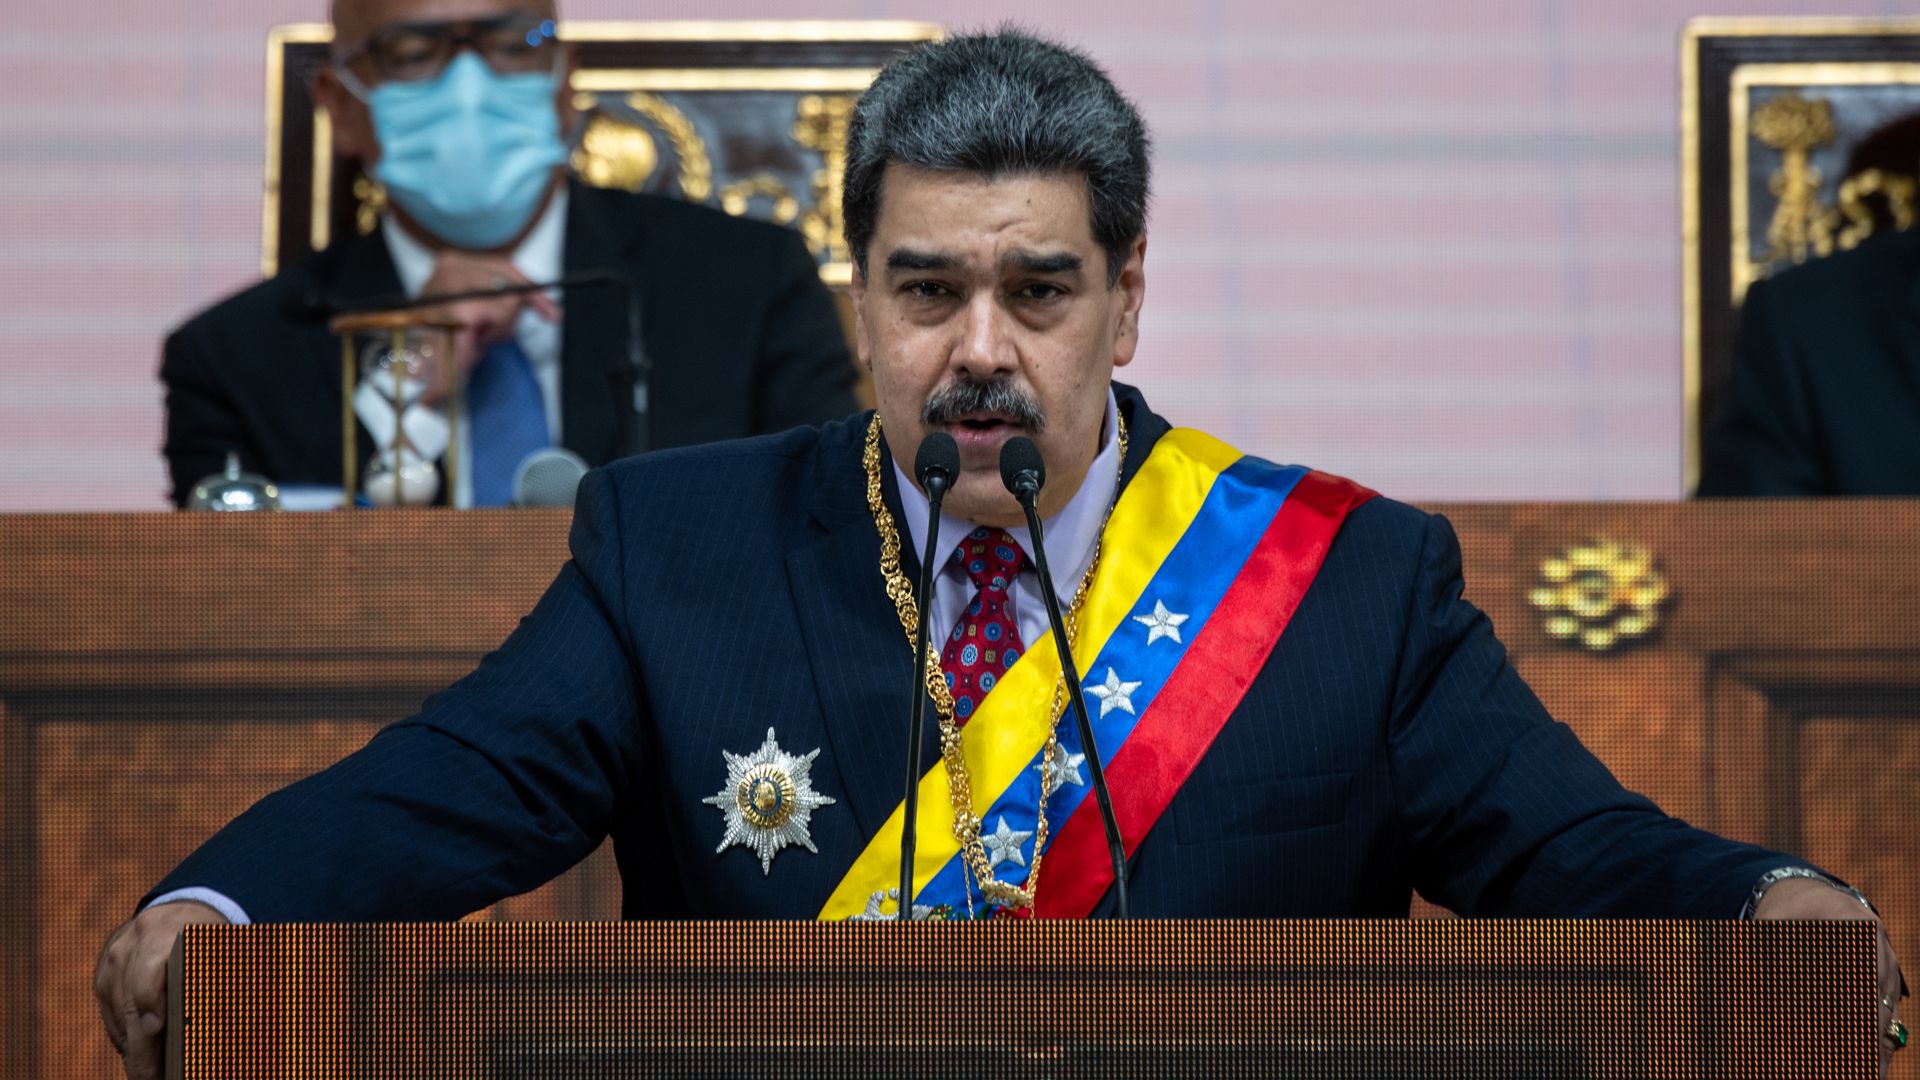 Nicolas Maduro, Venezuela's president, delivers a State of the Union address at the National Assembly in Caracas, Venezuela, on Jan. 15, 2022. Photographer: Gaby Oraa/Bloomberg via Getty Images